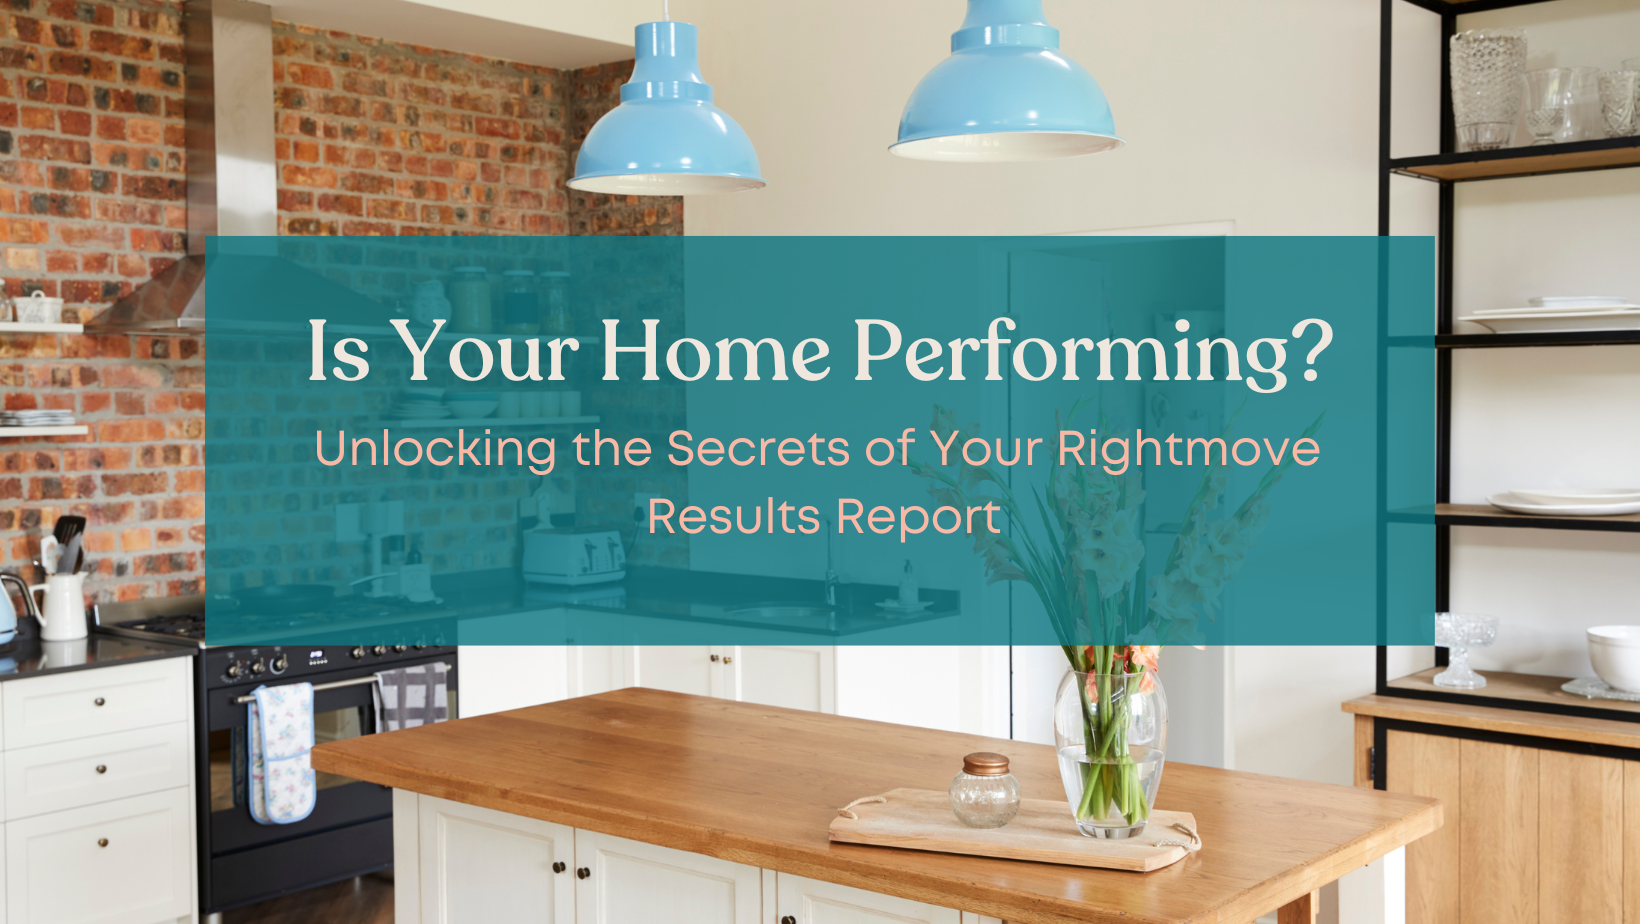 Your Rightmove Results Report